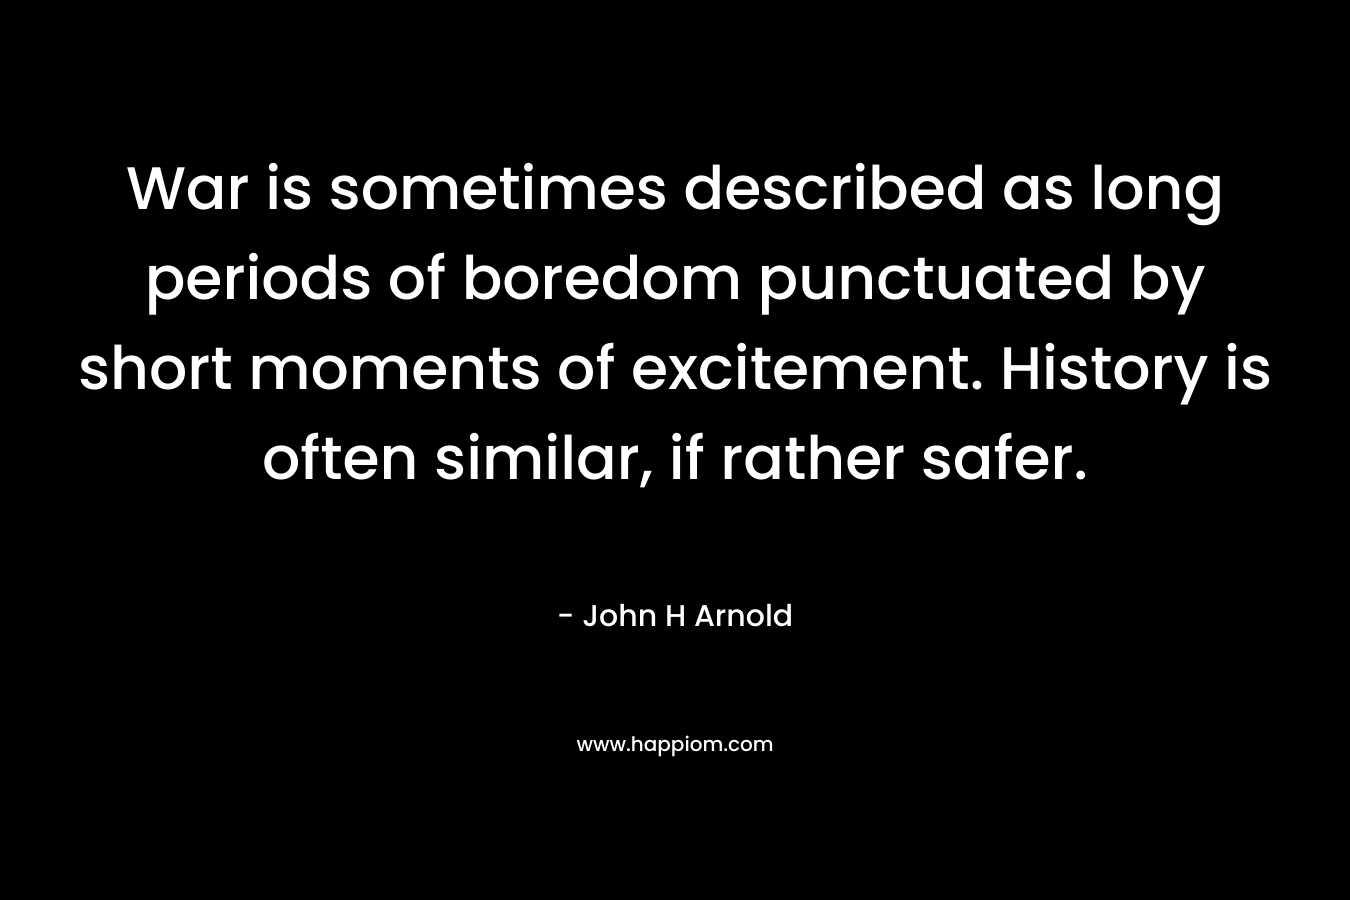 War is sometimes described as long periods of boredom punctuated by short moments of excitement. History is often similar, if rather safer. – John H Arnold